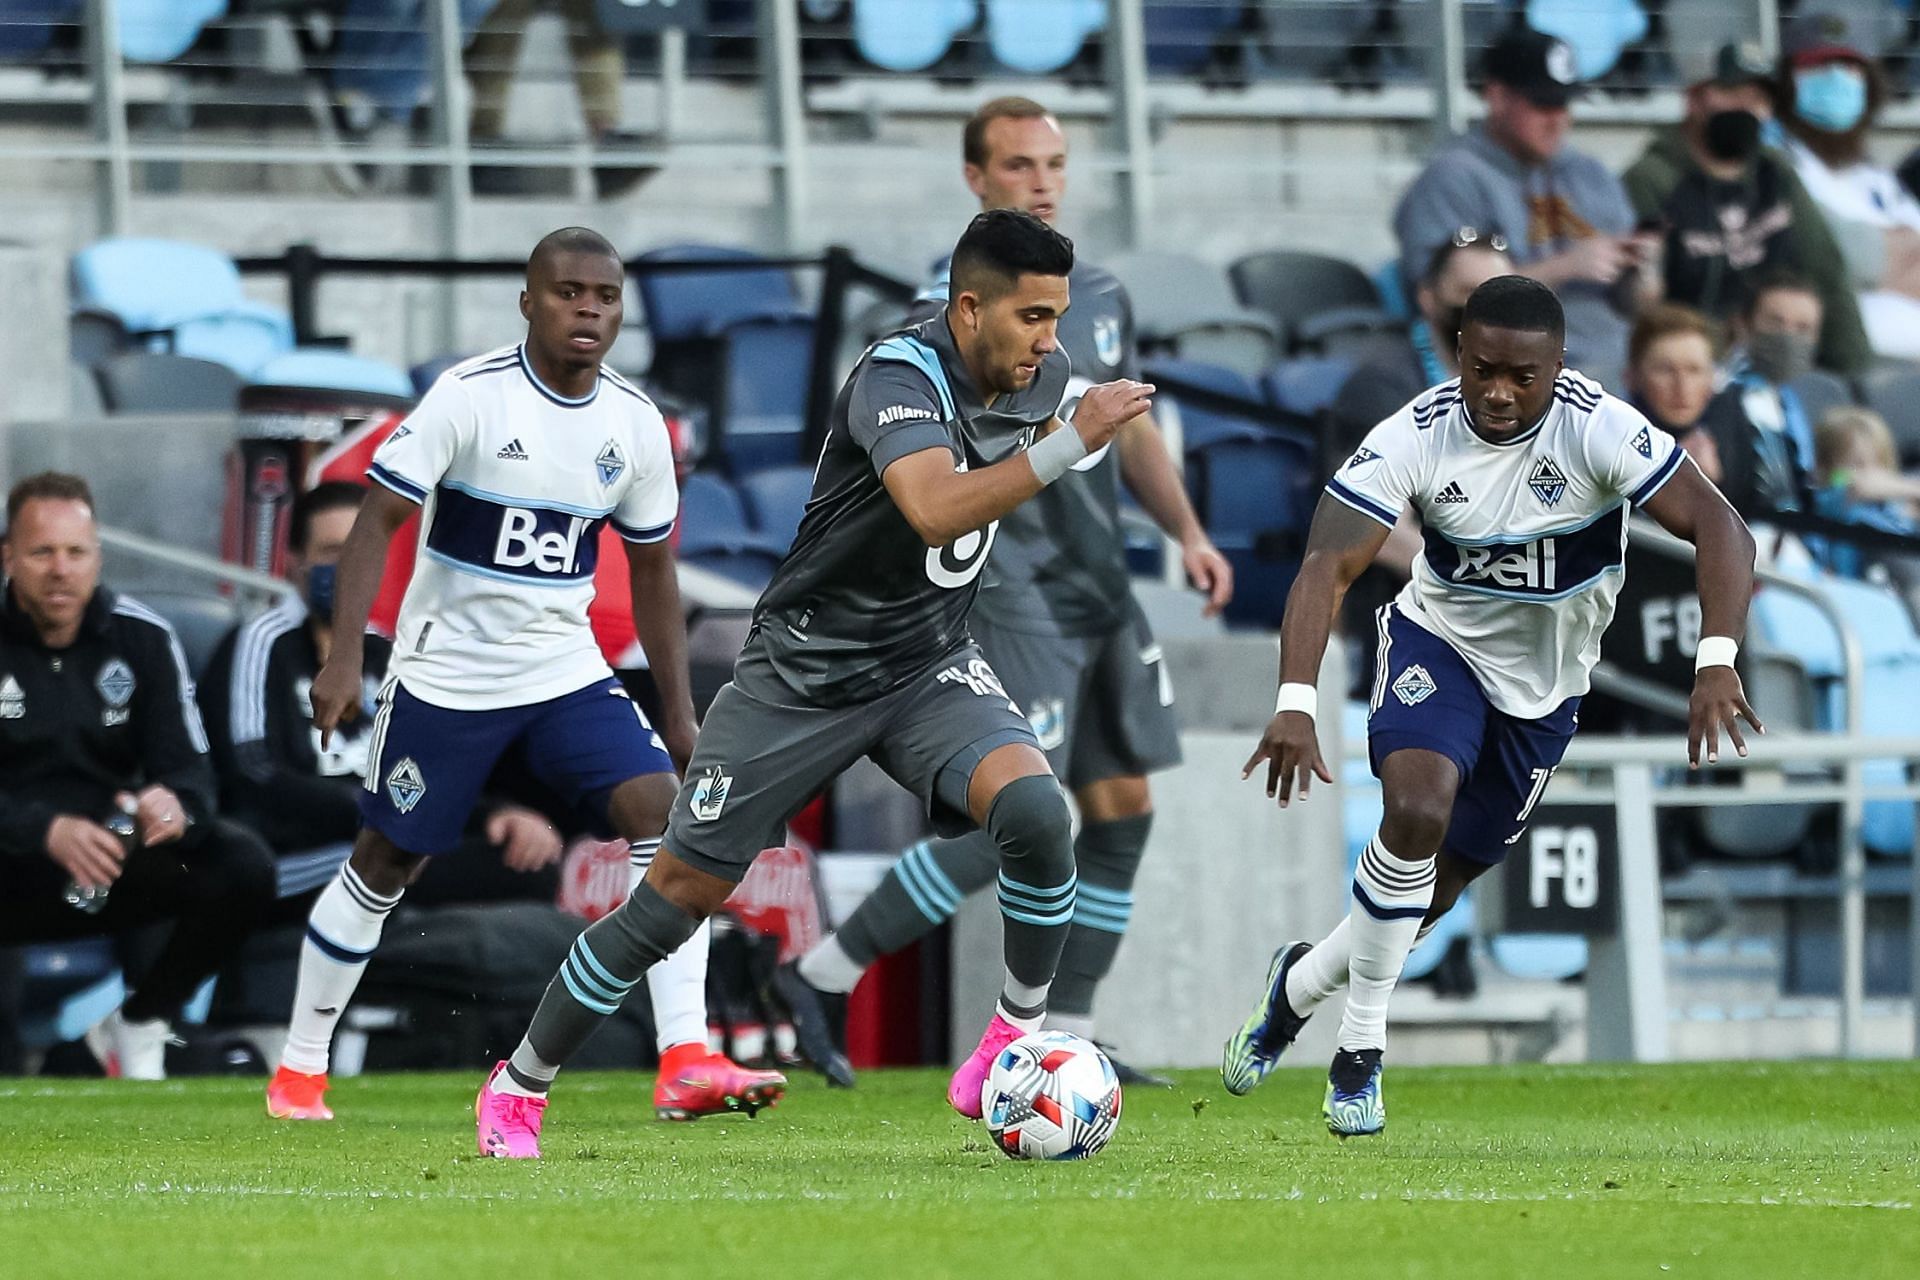 Reynoso will be a notable absence for Minnesota United